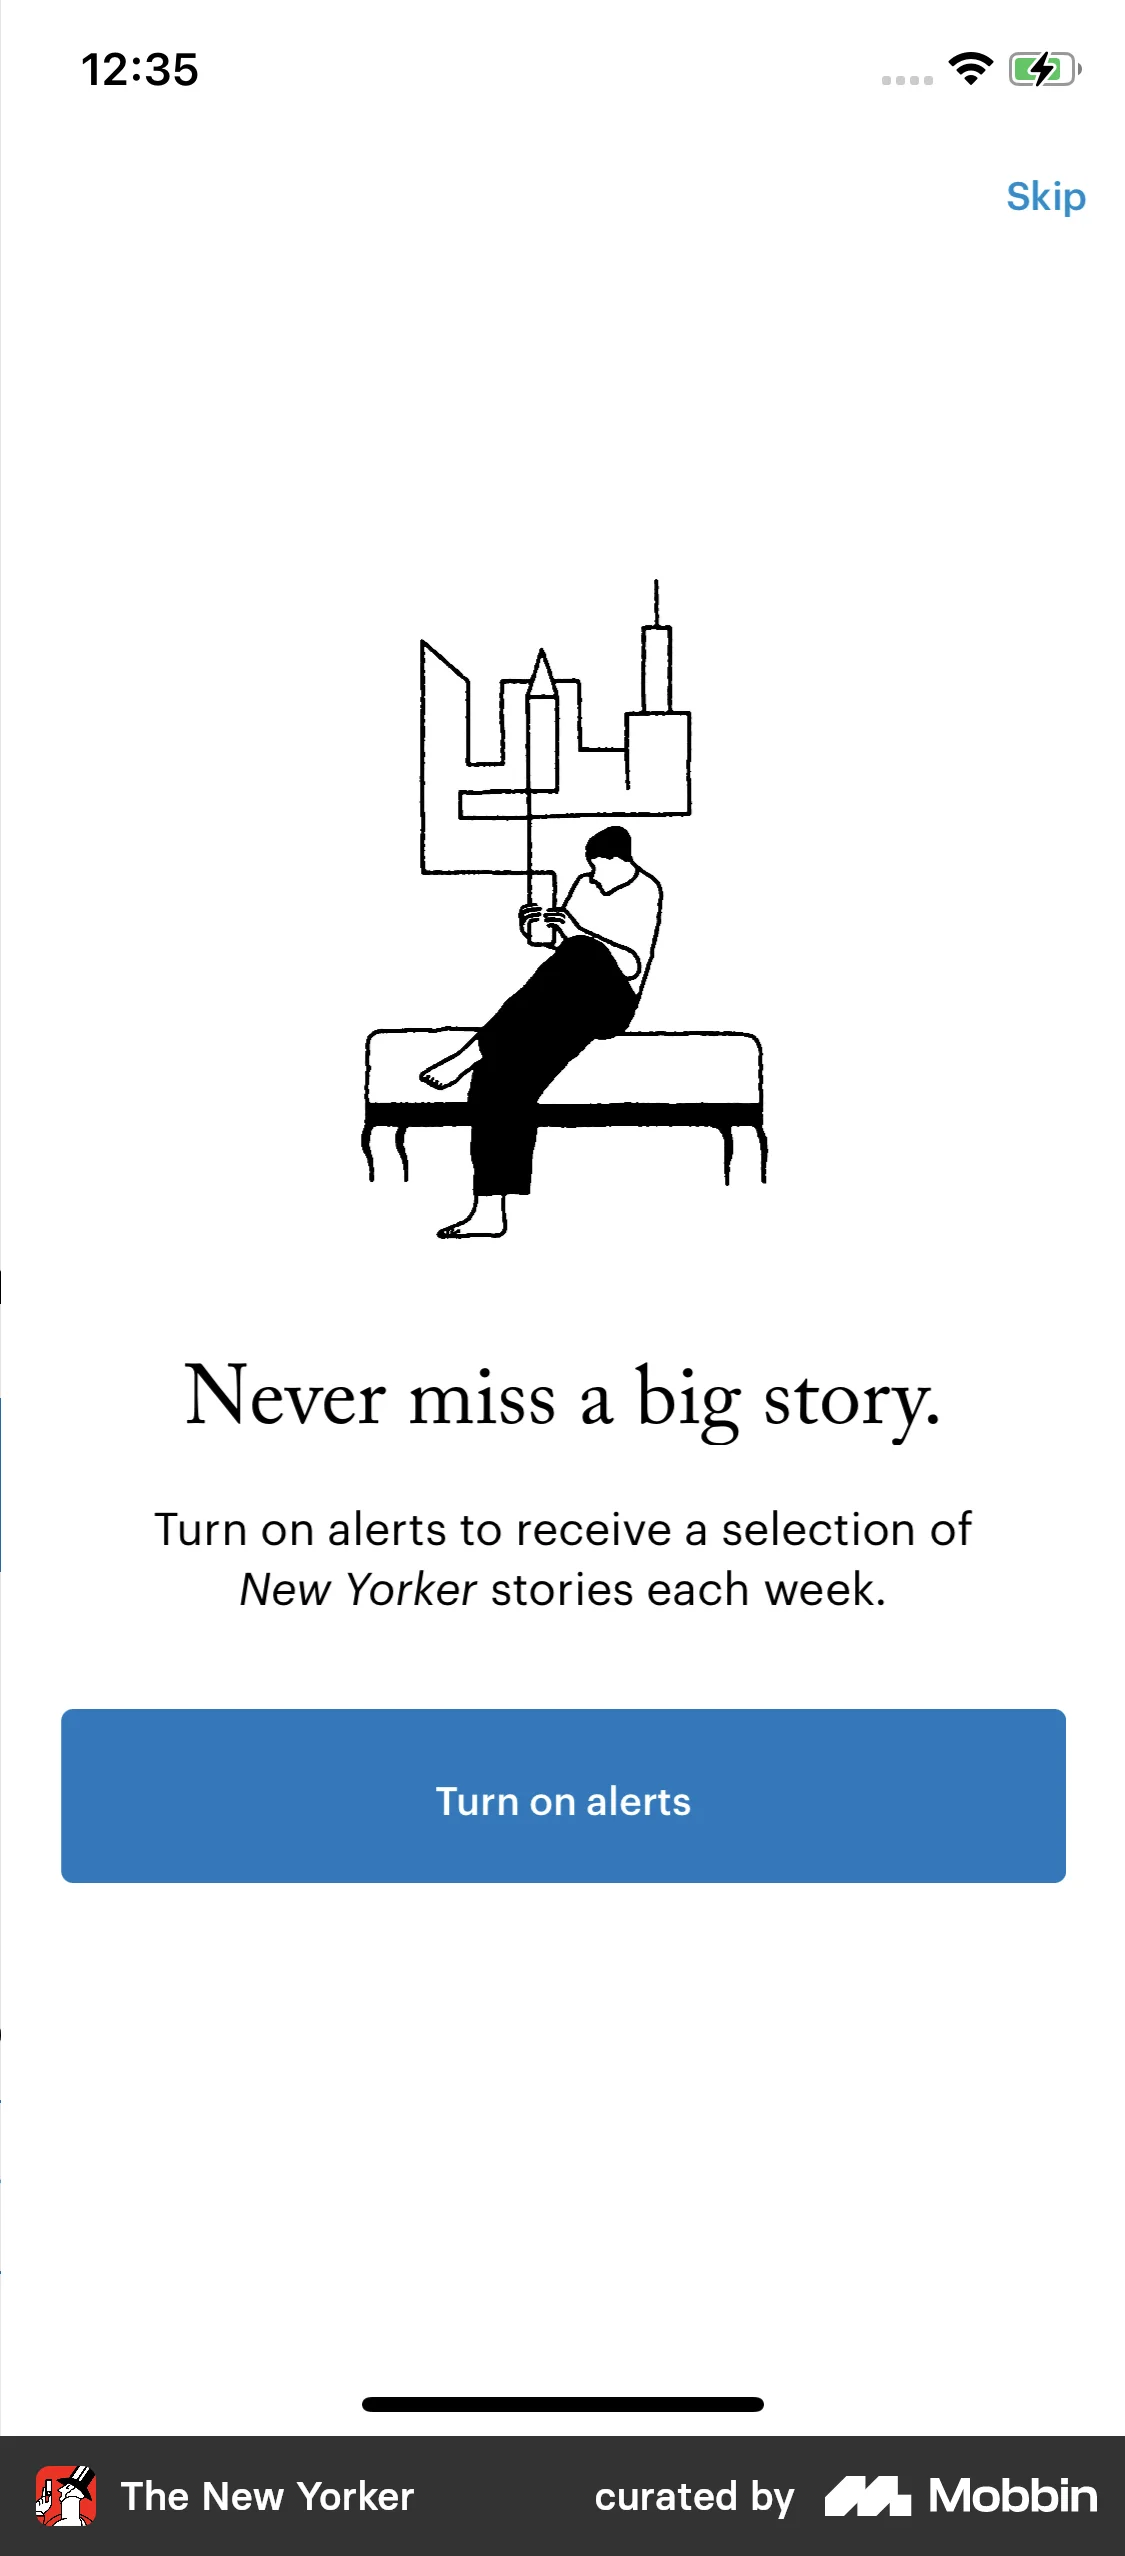 The New Yorker Onboarding screen